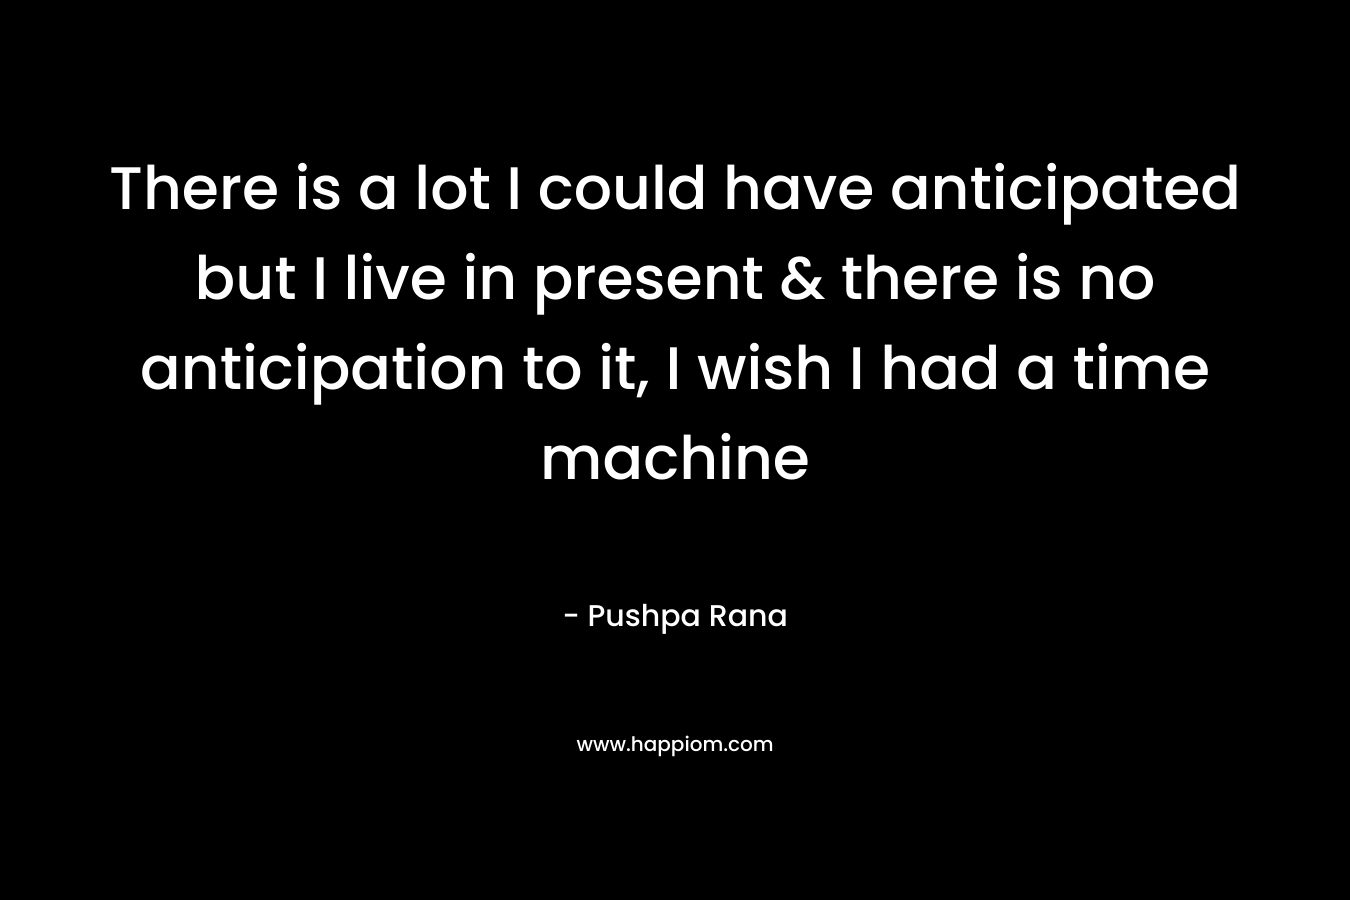 There is a lot I could have anticipated but I live in present & there is no anticipation to it, I wish I had a time machine – Pushpa Rana